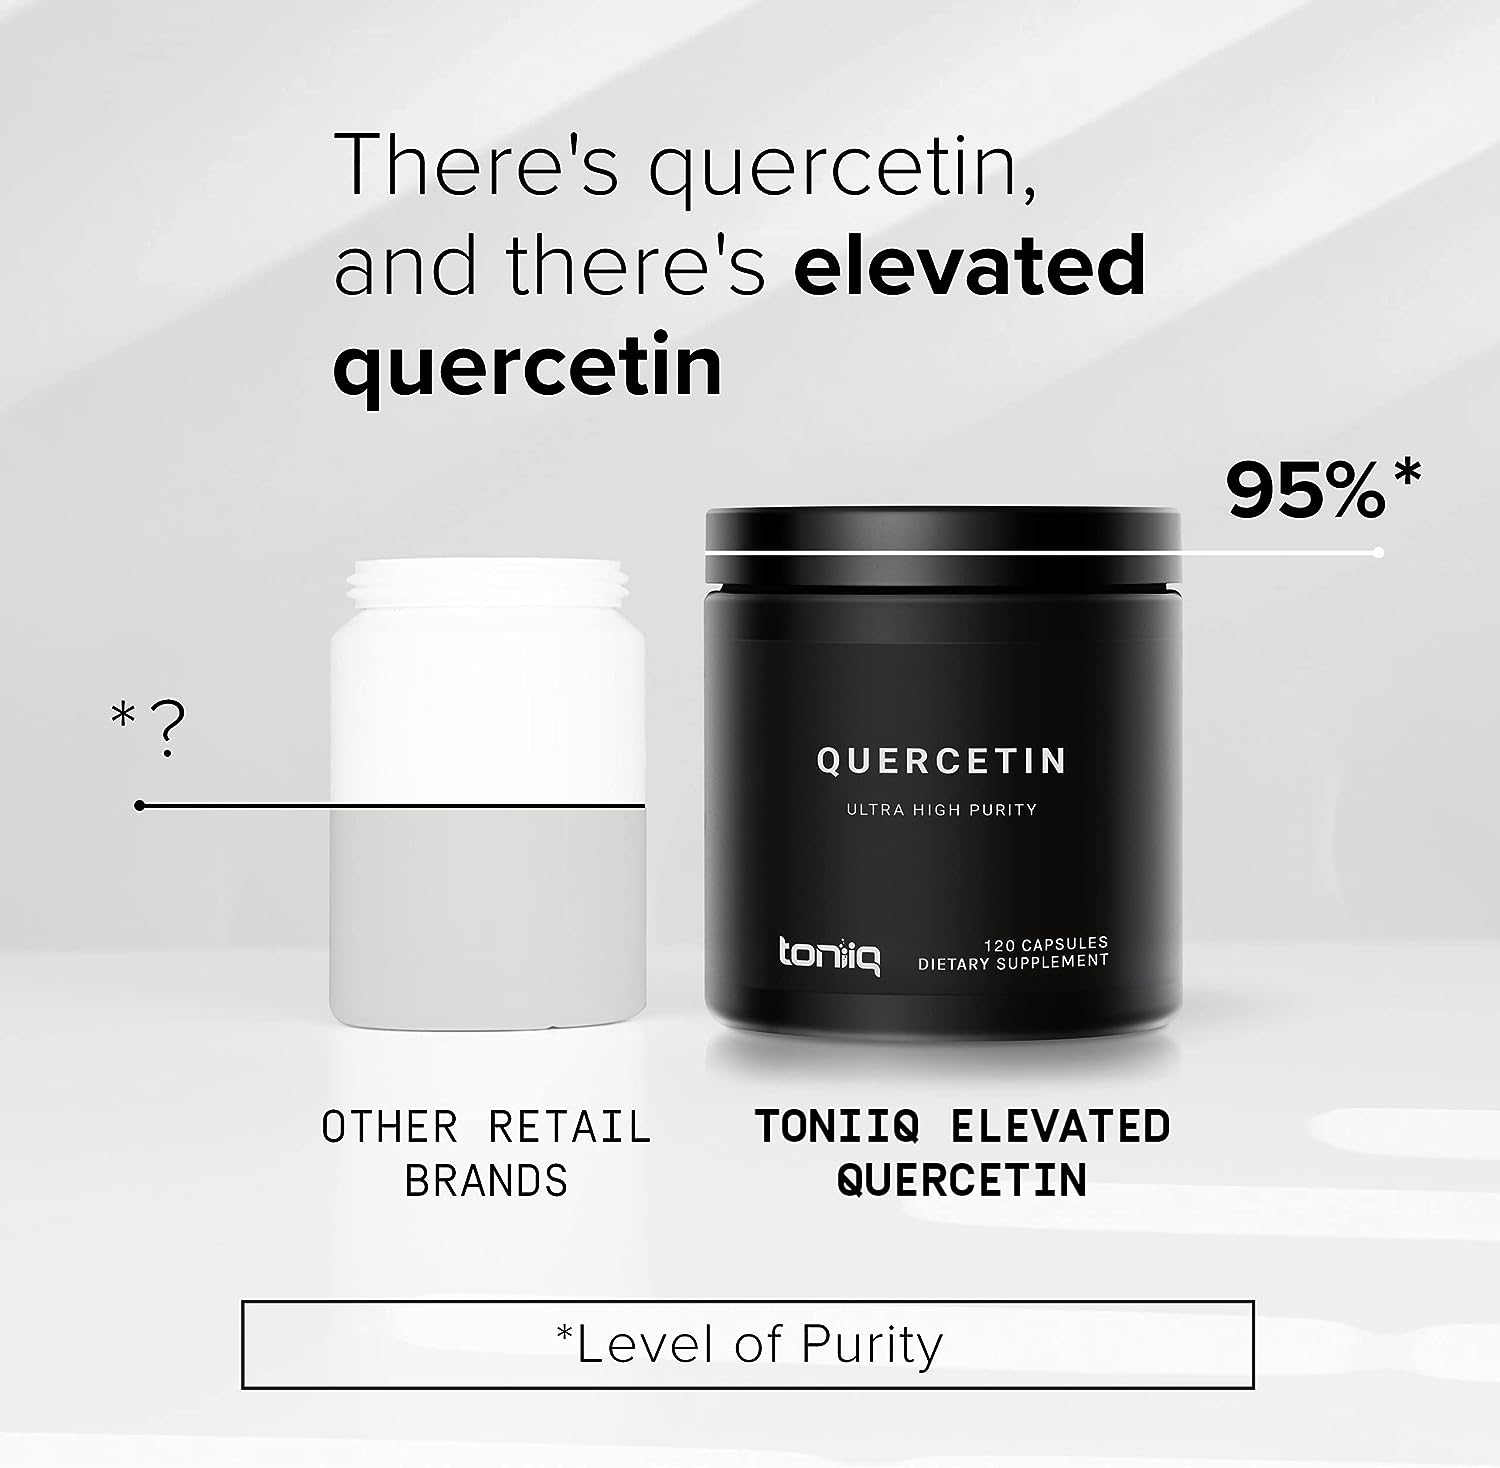 Toniiq Ultra High Purity Quercetin Capsules - 95%+ Highly Purified and Highly Bioavailable - 1000mg Per Serving - 120 Capsules Quercetin Supplement